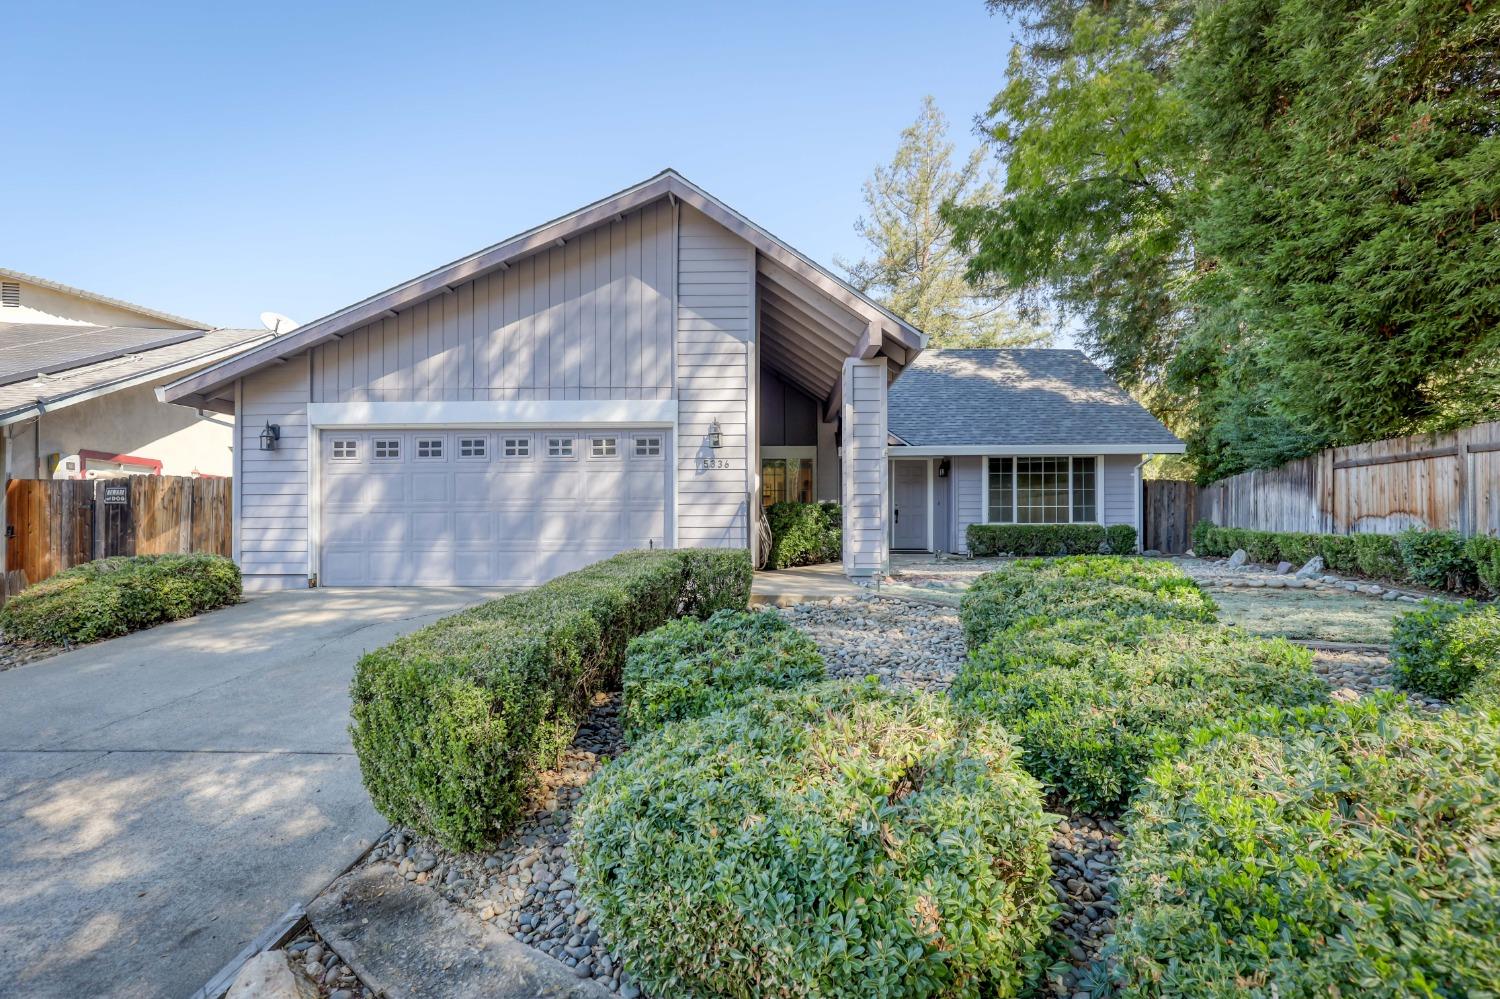 Terrific Fair Oaks enclave of cul-de-sacs with no through traffic.  Single-story home at the end of 